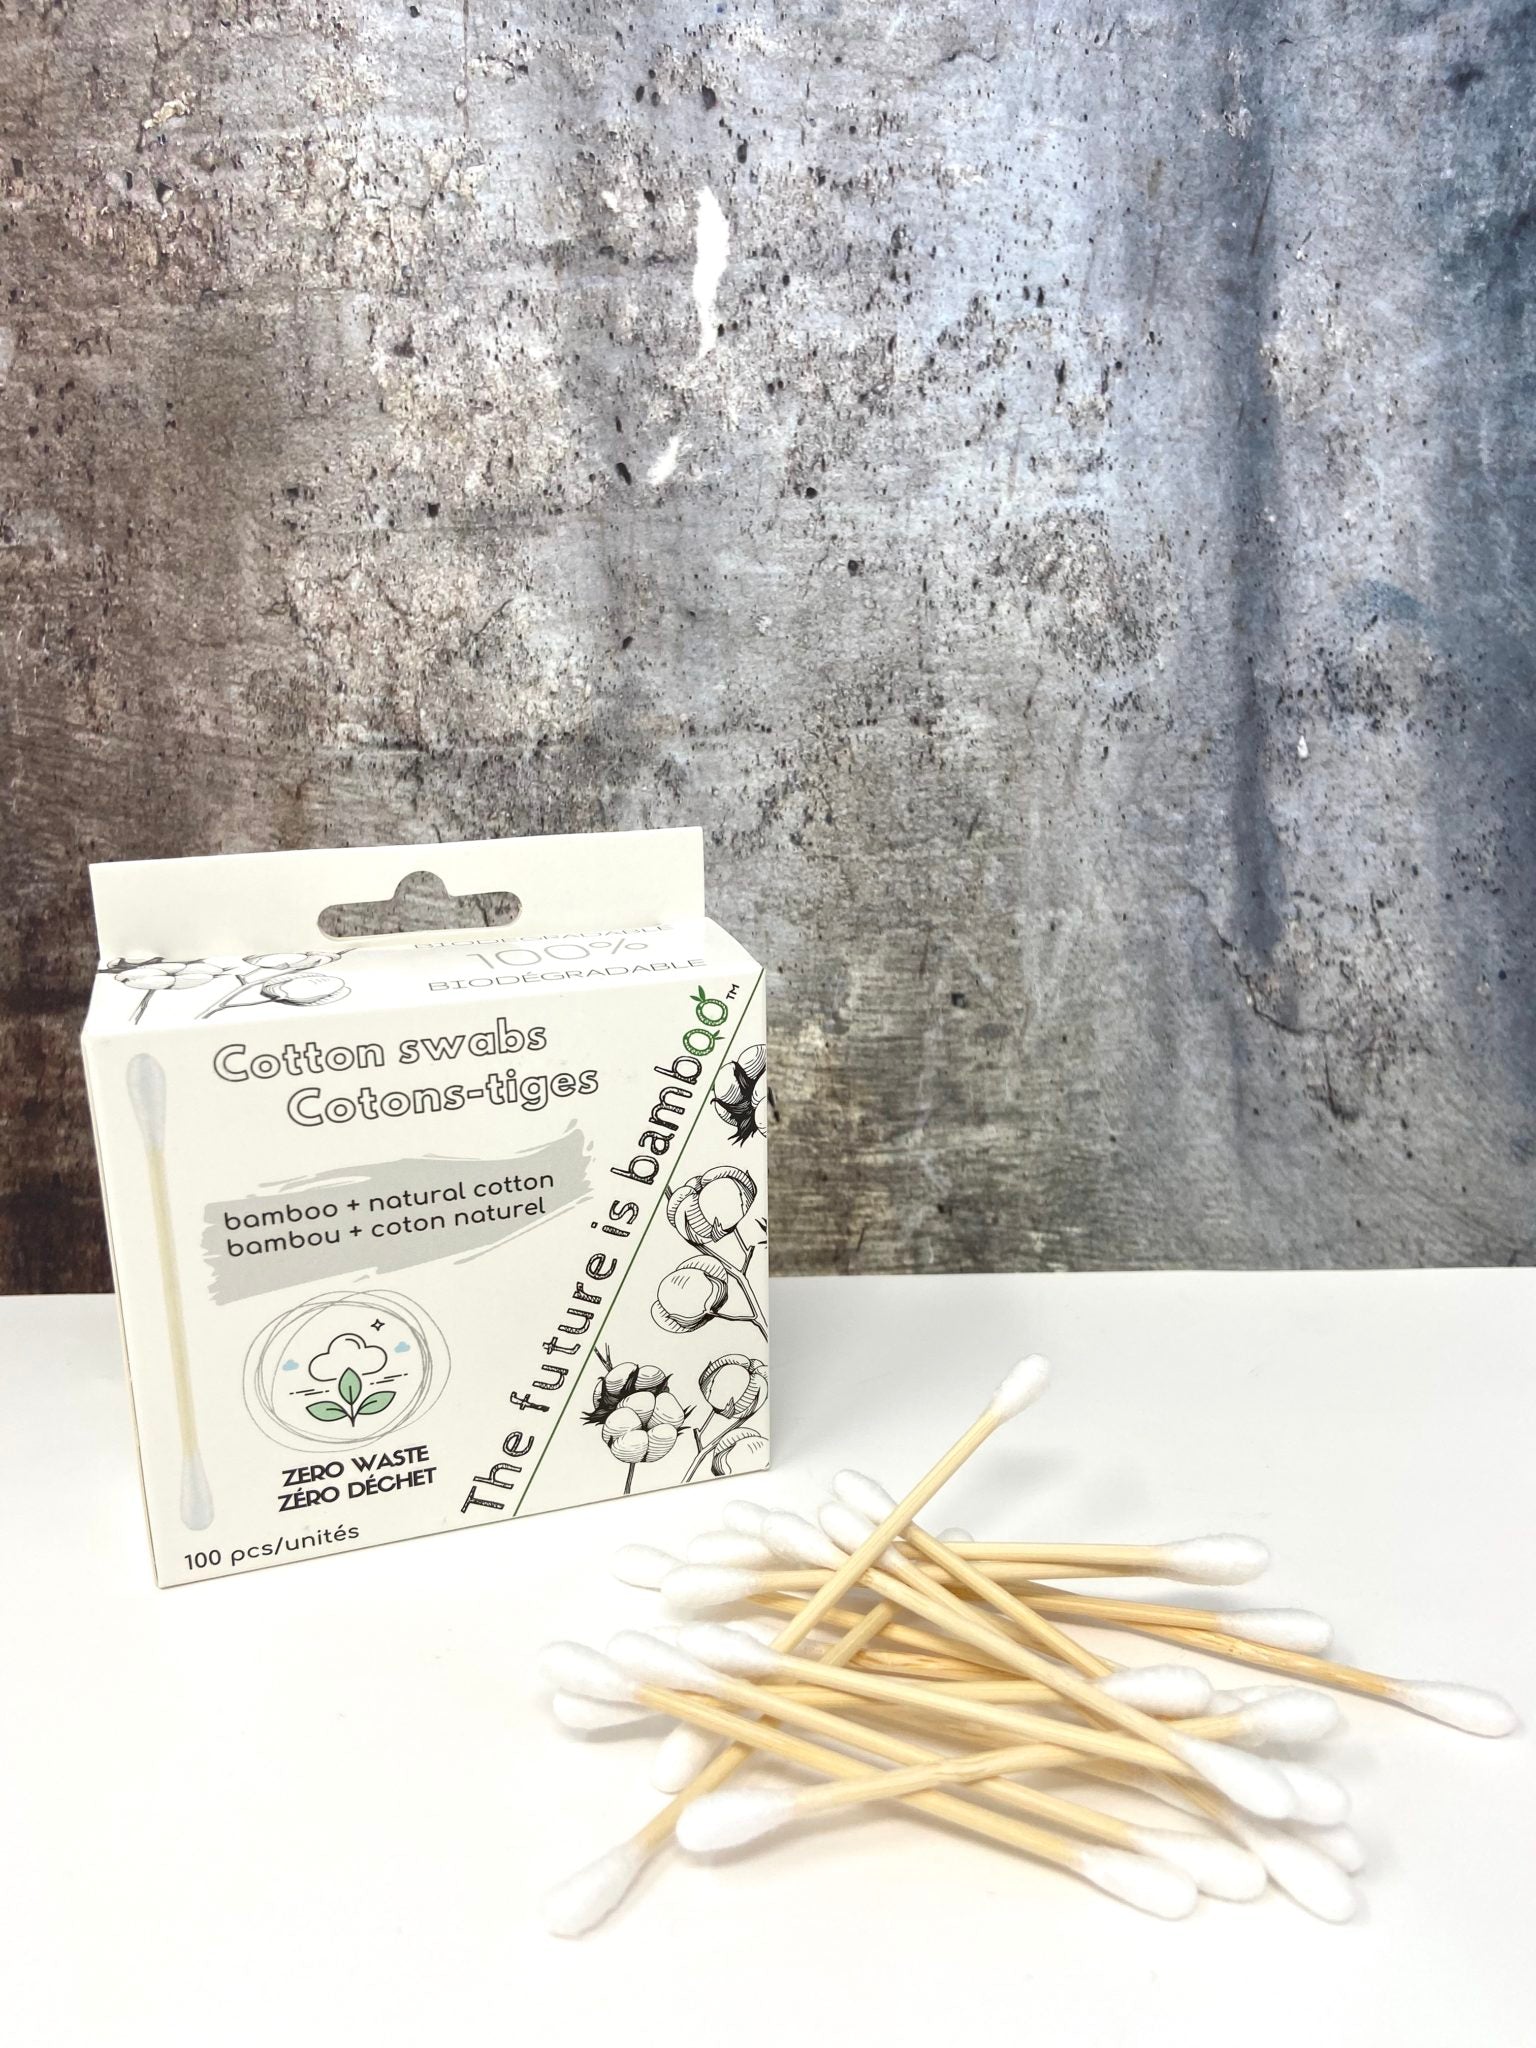 The Future is Bamboo - Bamboo + Organic Cotton Biodegradable Cotton Swabs All Things Being Eco Chilliwack Zero Waste Specialty Store Vegan